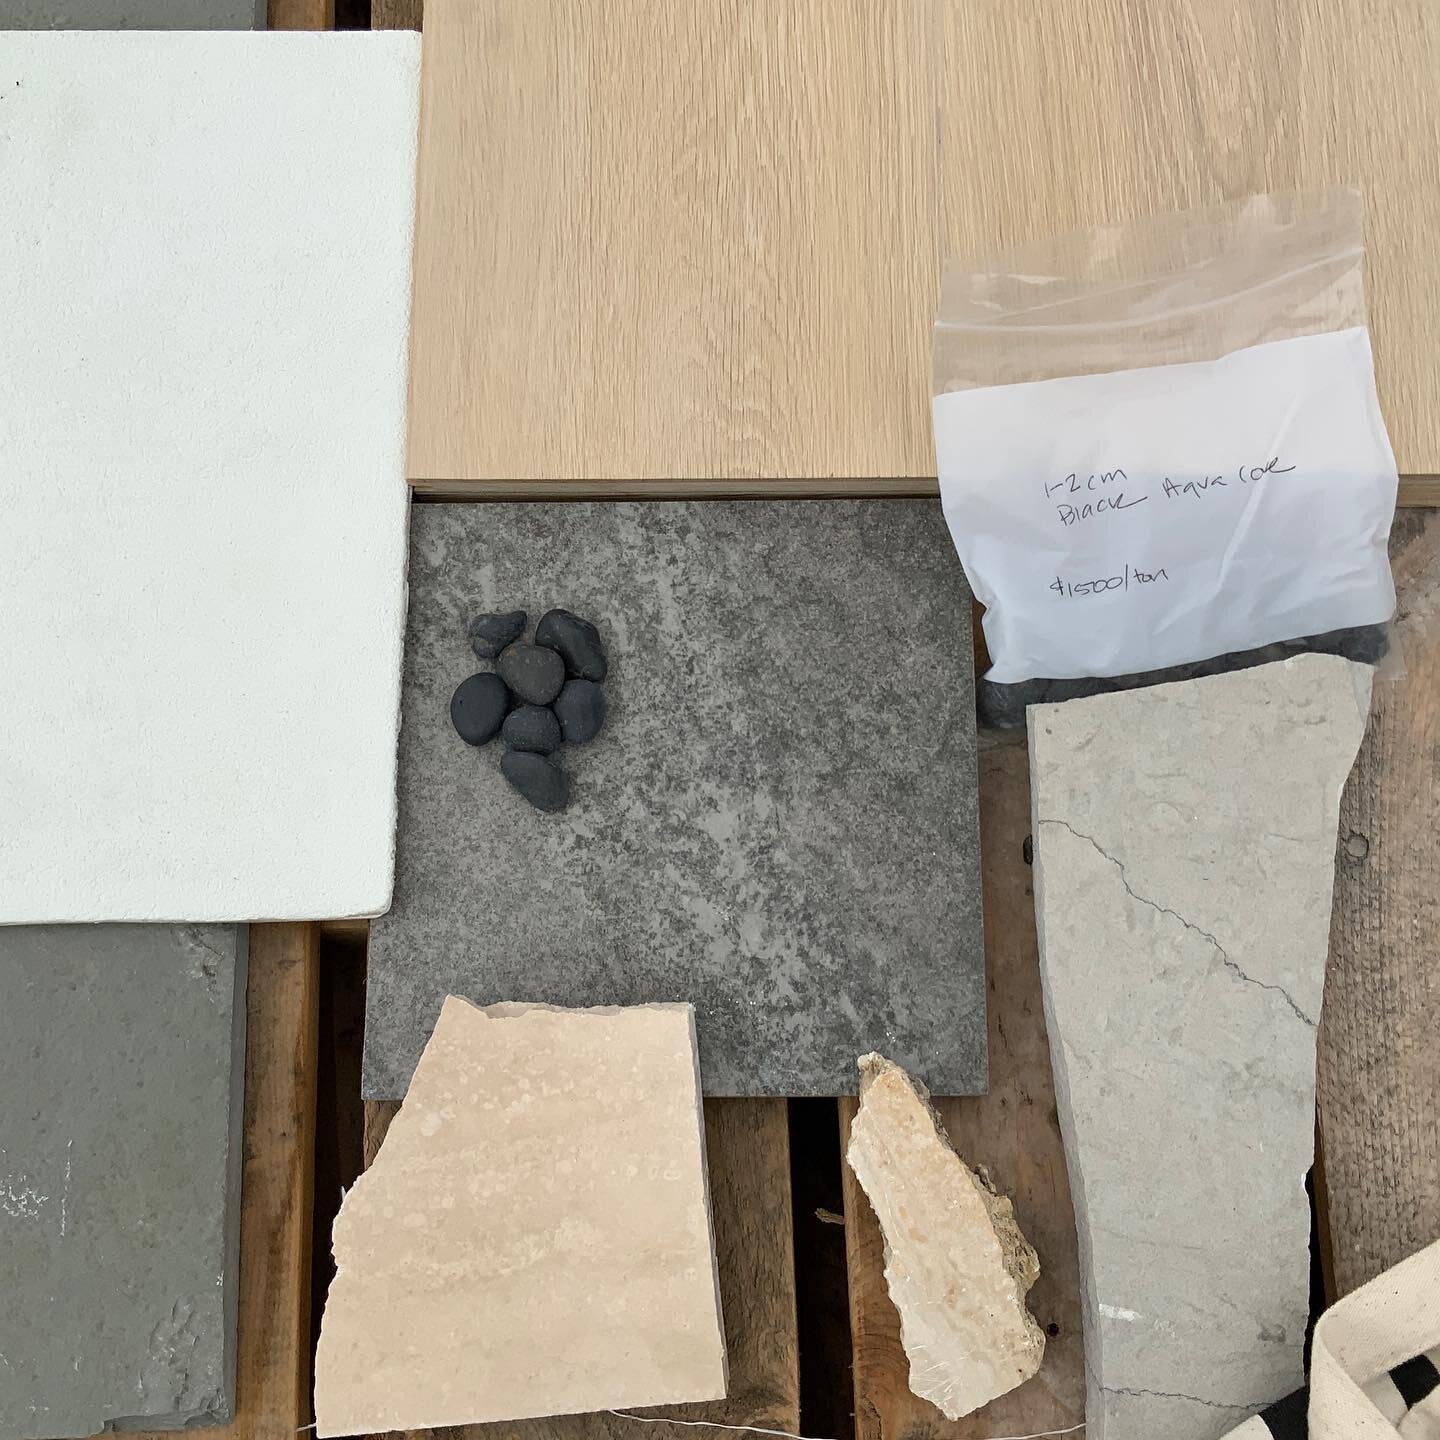 Material selection reconnaissance trip for our San Francisco project. Seeing how it all fits together - stone paving (or porcelain? leaning porcelain), decorative gravel, terrazzo for custom outdoor fireplace. Seeing how it looks with the other nearb